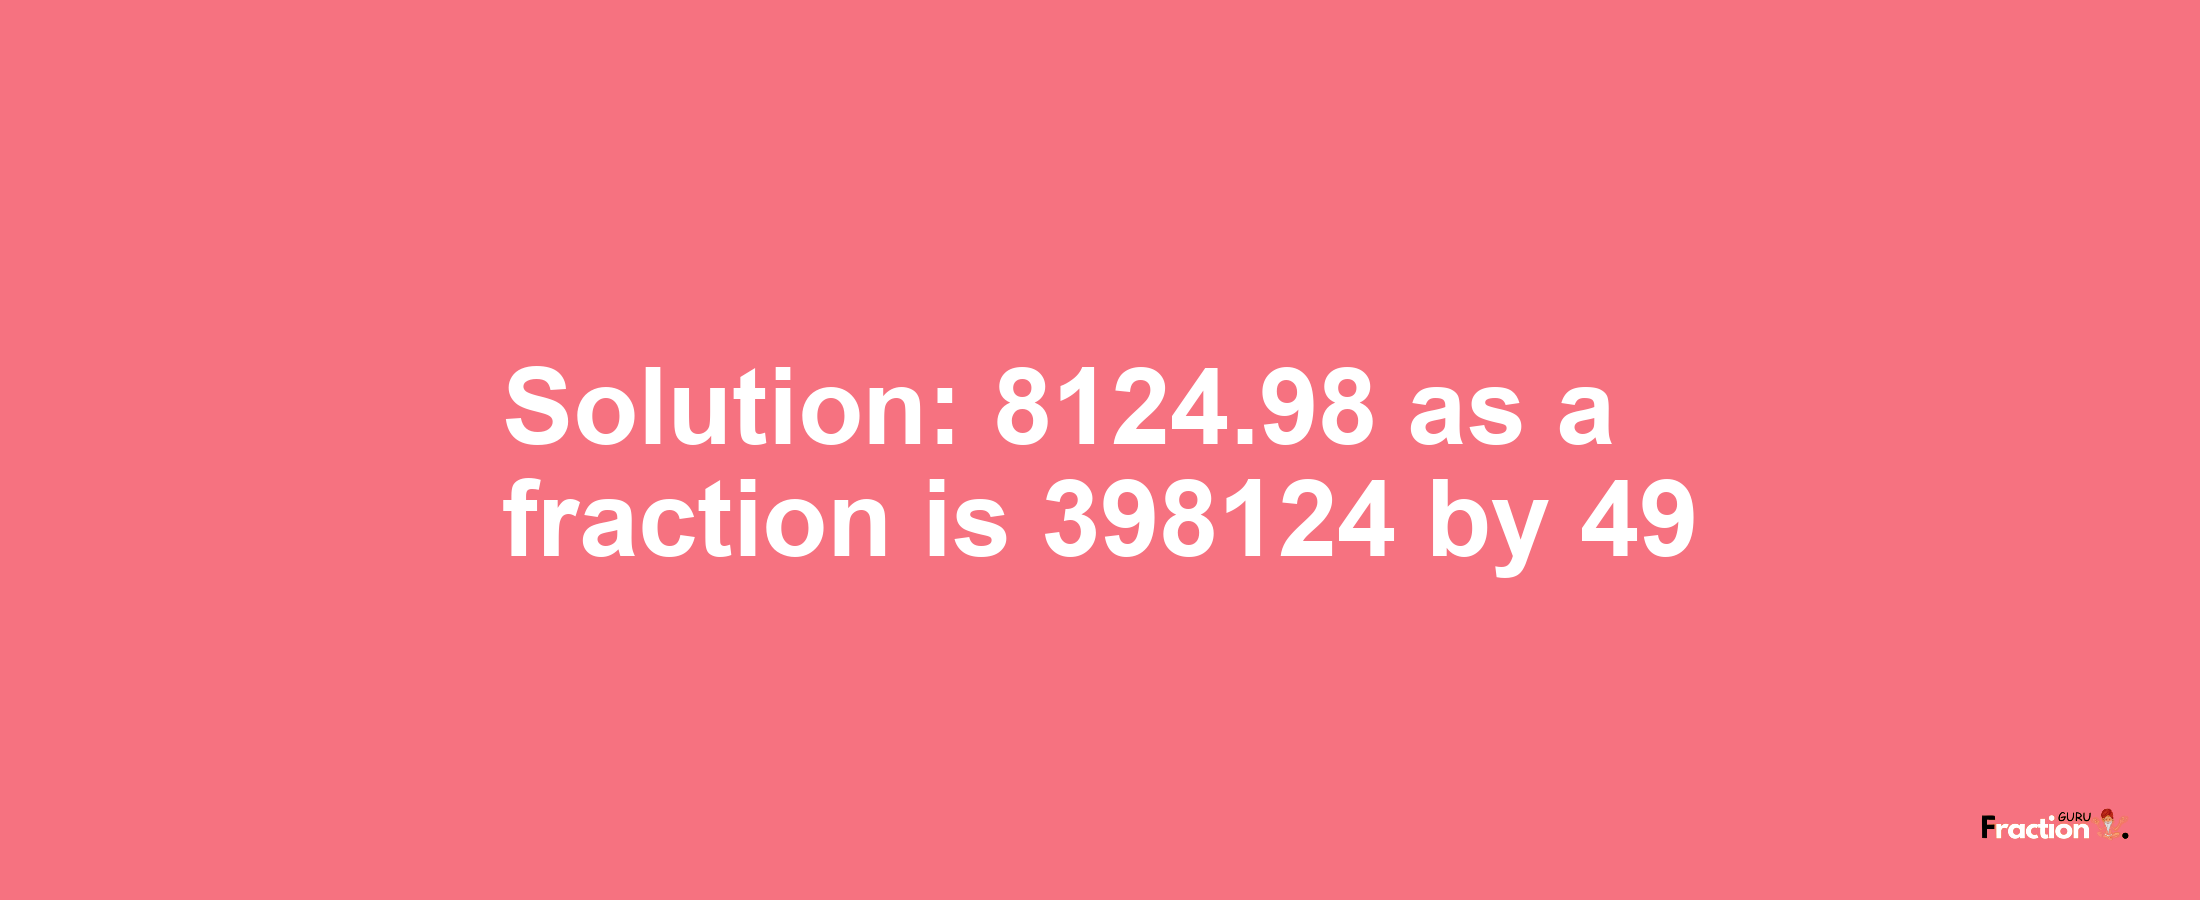 Solution:8124.98 as a fraction is 398124/49